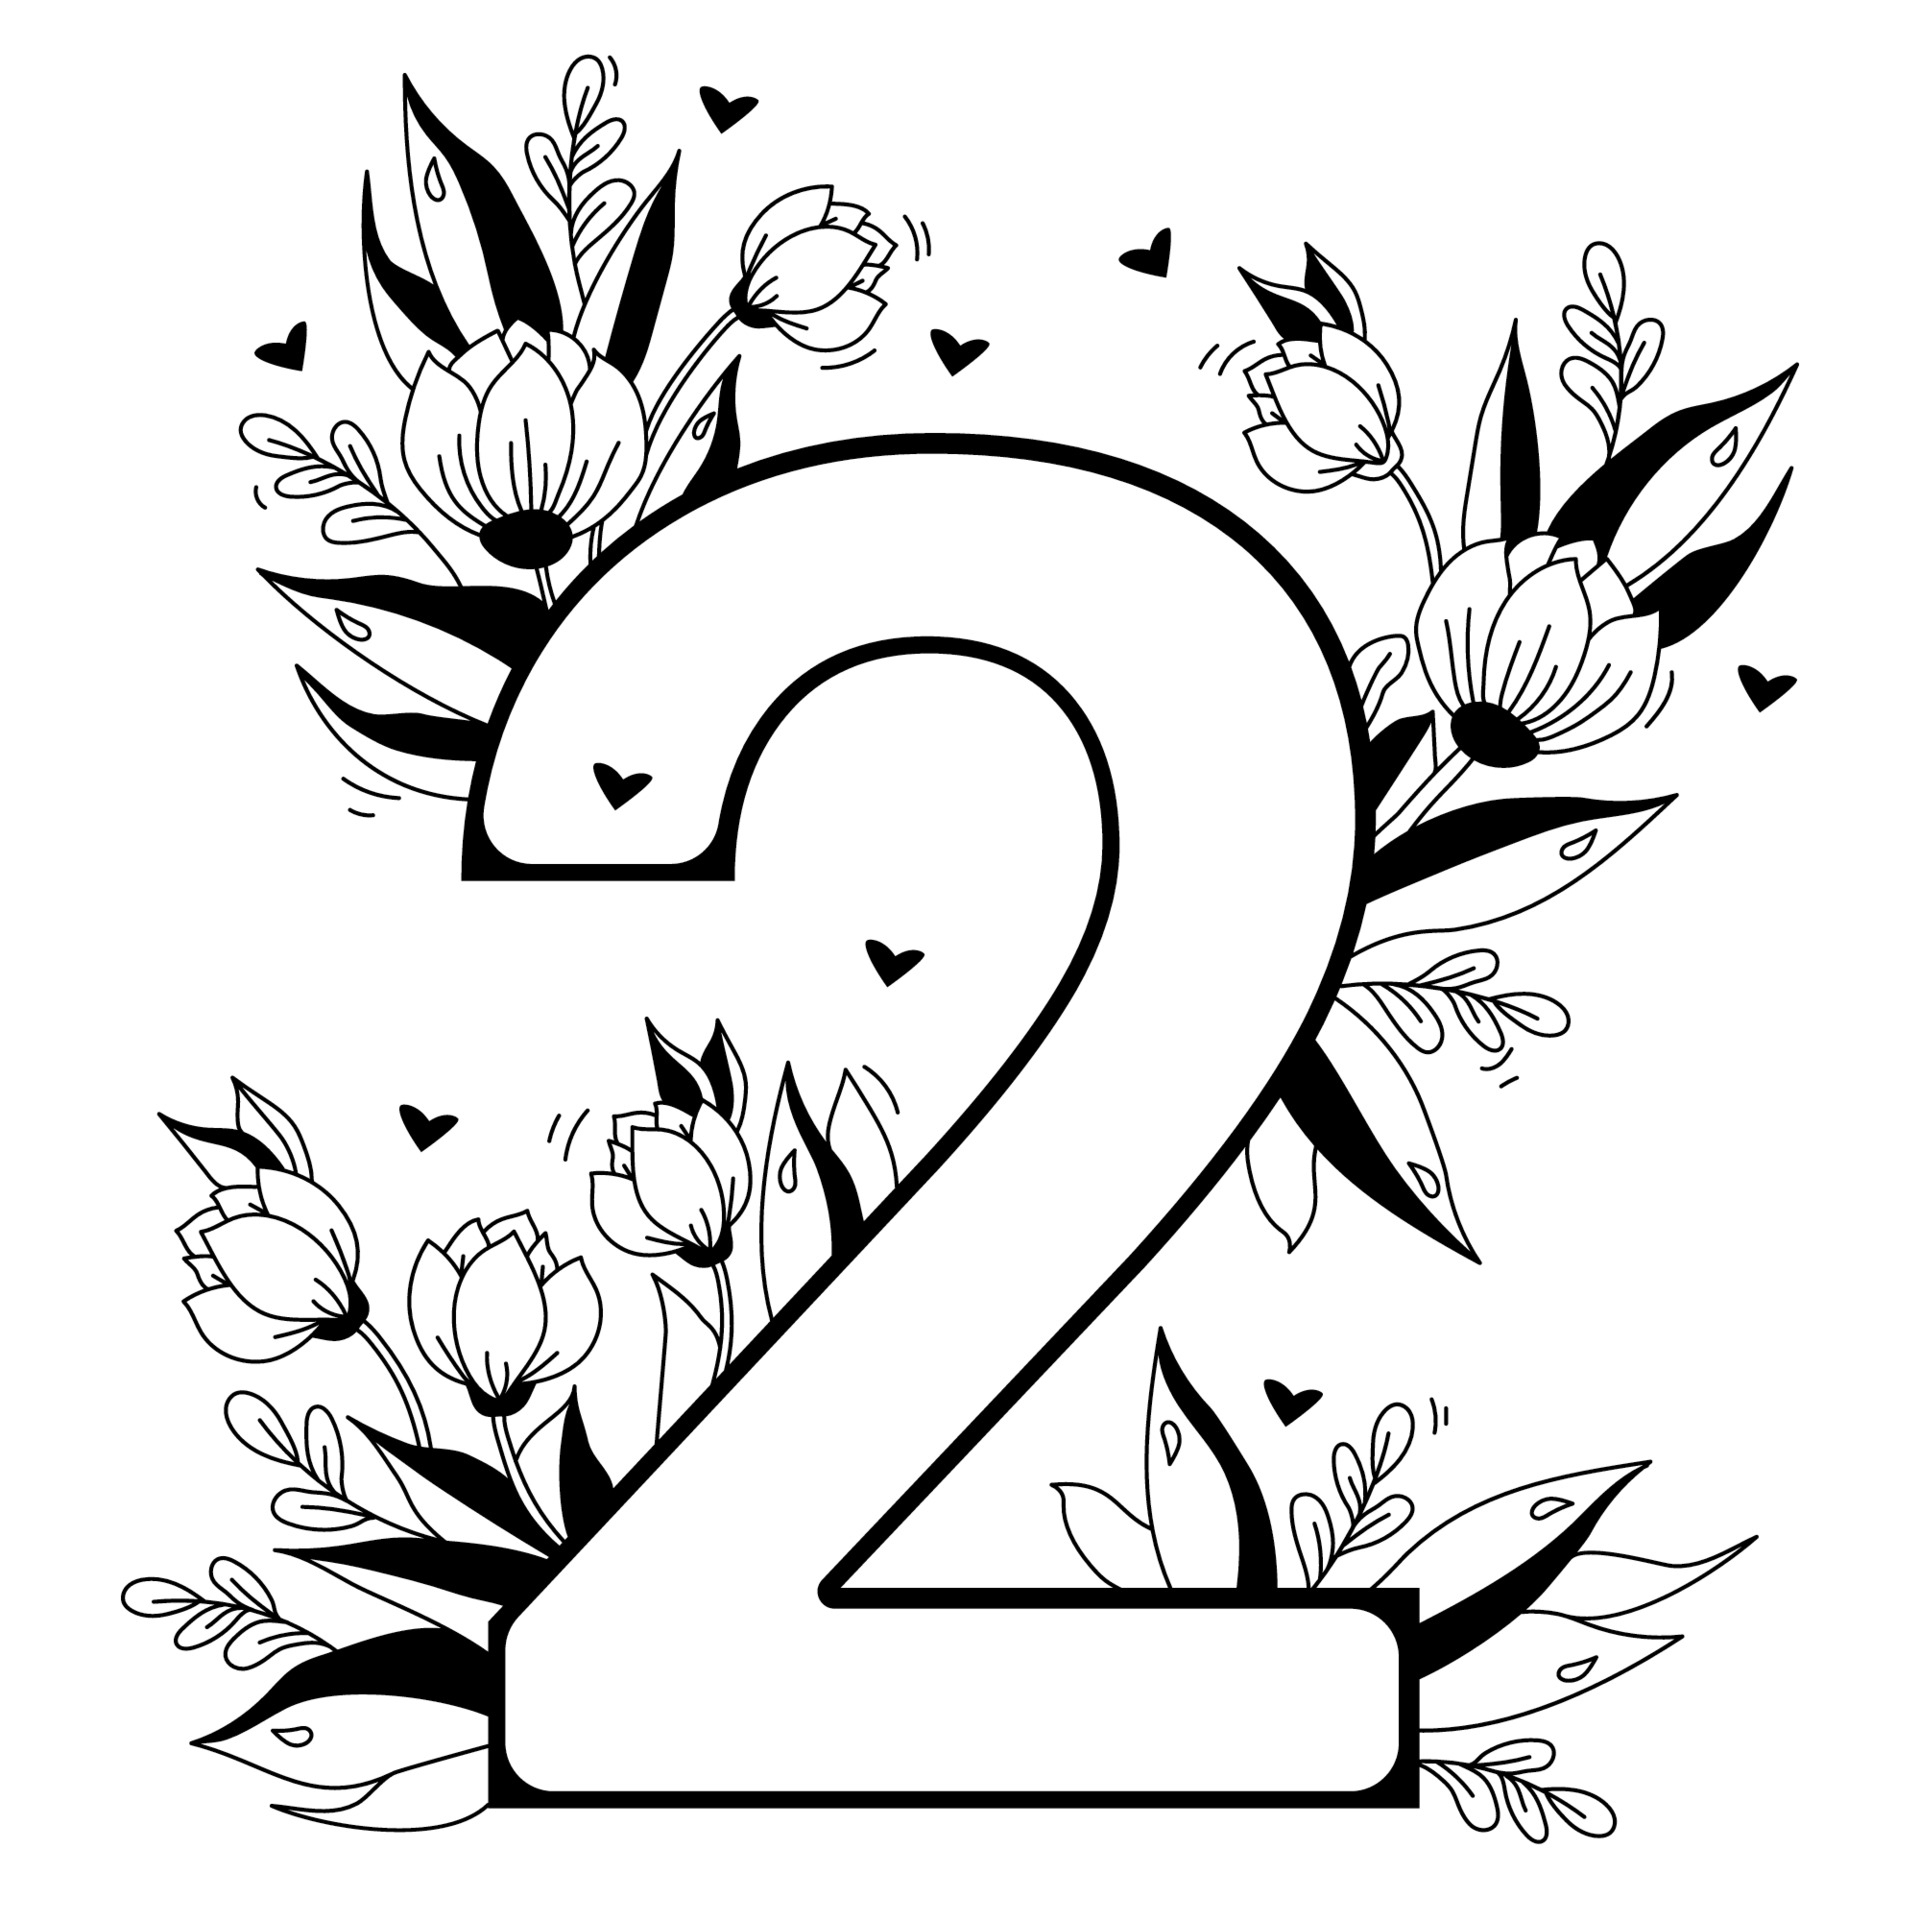 flower-number-decorative-floral-pattern-numbers-two-big-2-with